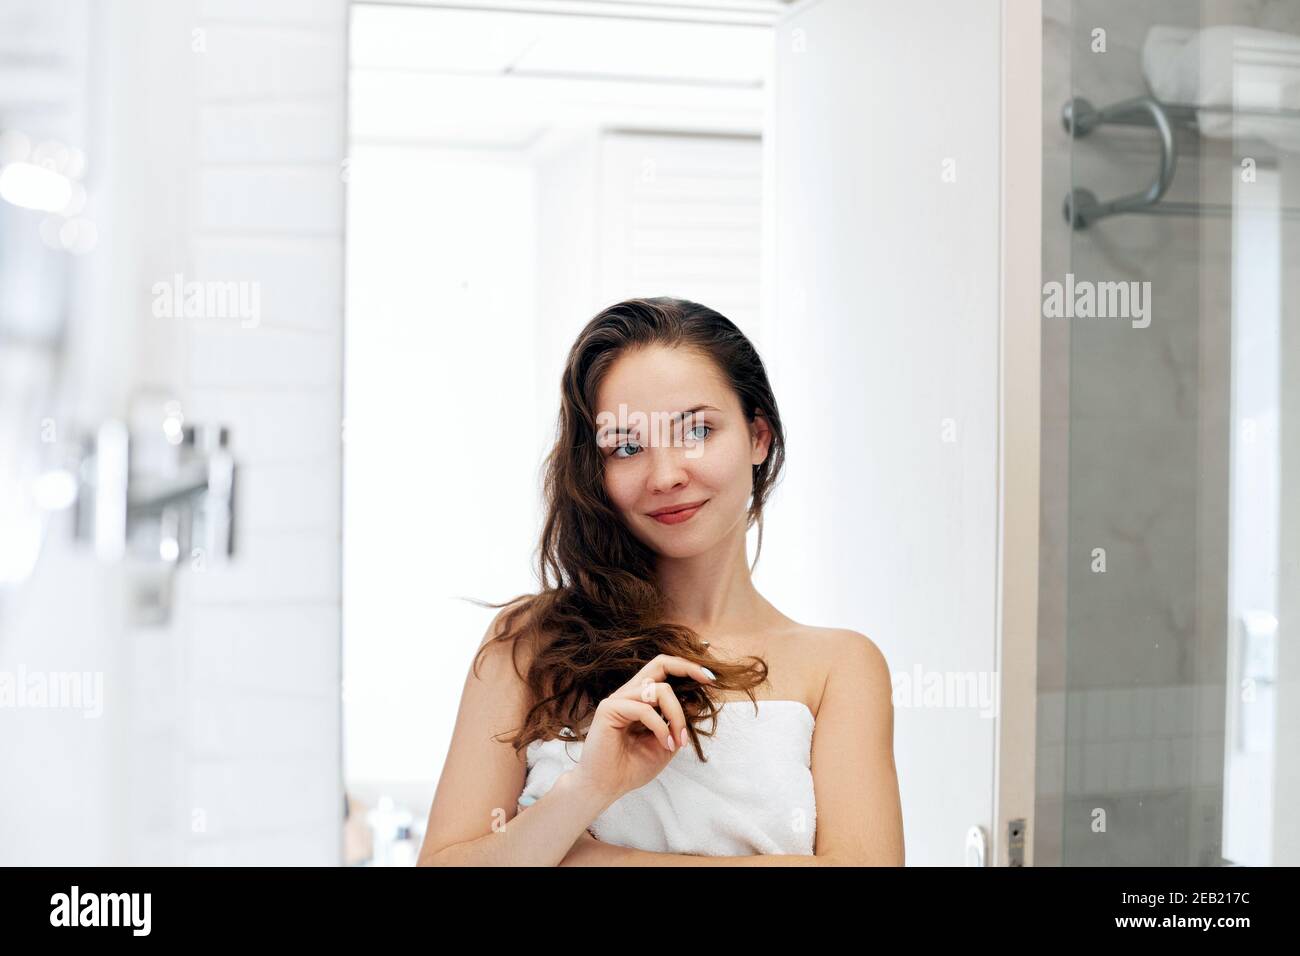 Hair and body care. Woman touching hair and smiling while looking in the mirror.Portrait of happy girl with wet hair in bathroom applying conditioner Stock Photo